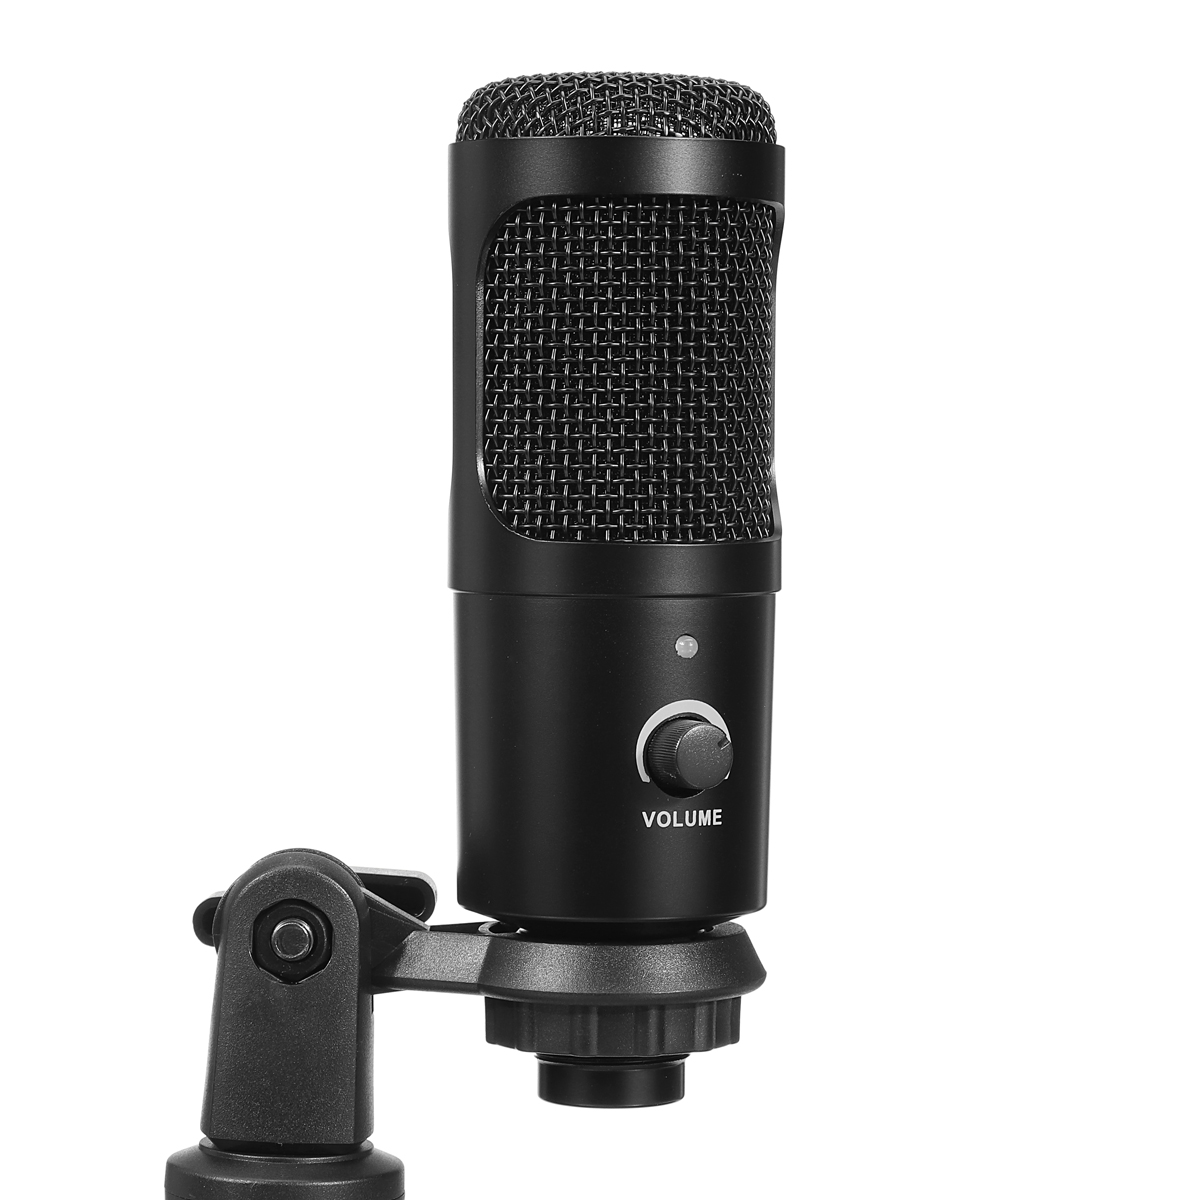 Wired USB Microphone with Tripod for Computer Windows for Mac PC Live Broadcast Video Conferencing Audio Recording Youtube